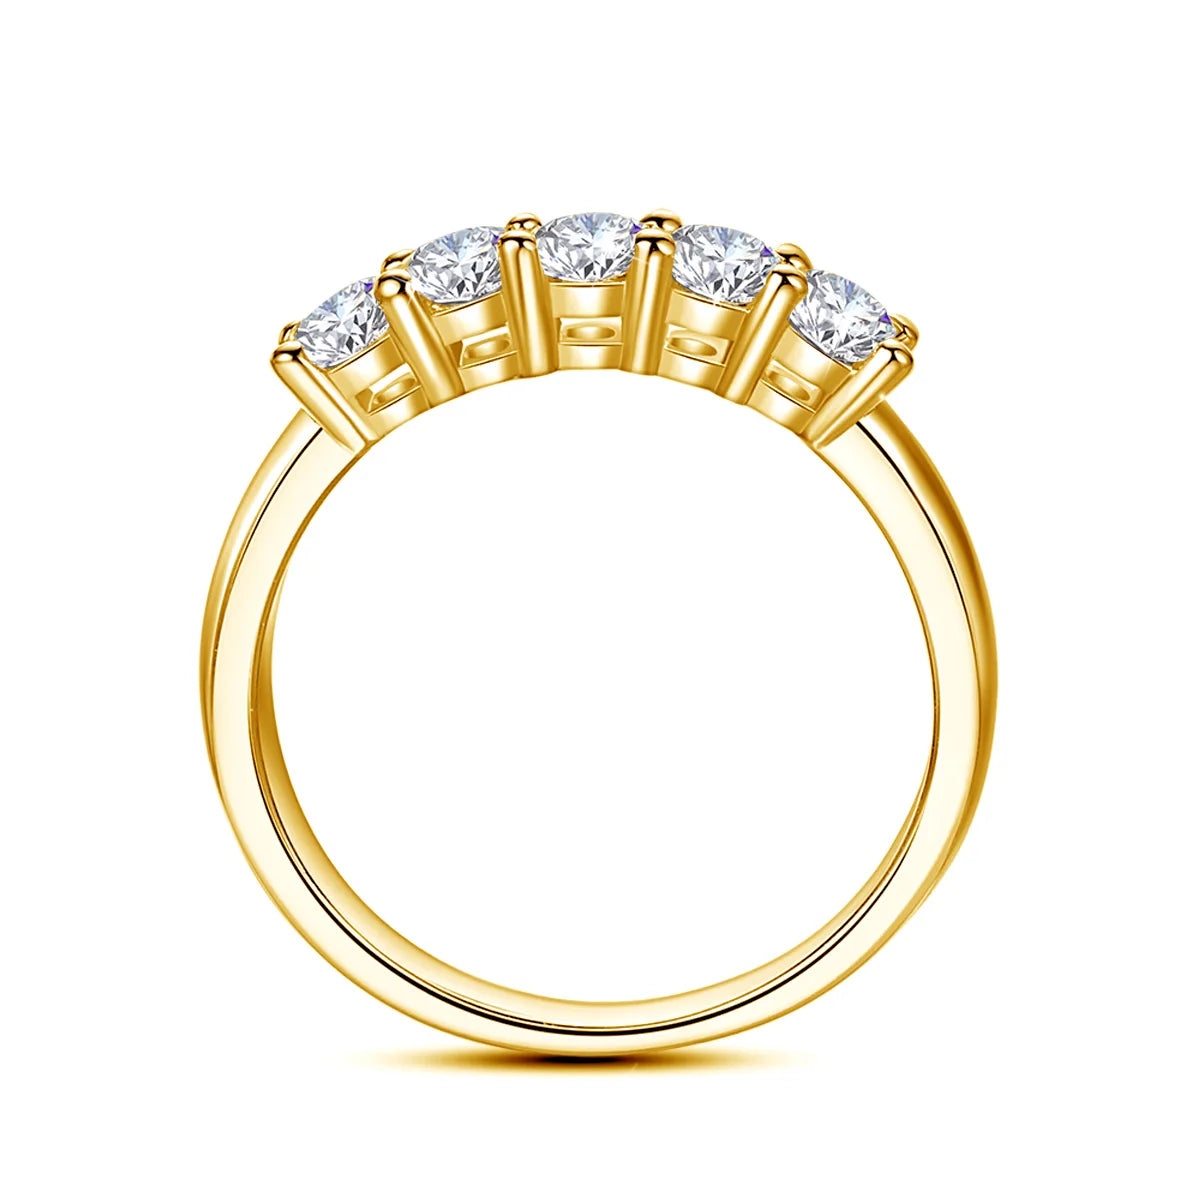 A stunning Maramalive™ With Certificate Original Solid 18K Gold Moissanite Ring For Women 5 Stone Luxury Wedding Jewelry With Stamp Gift Female with five evenly spaced round diamonds set in a row on the top half of the band.